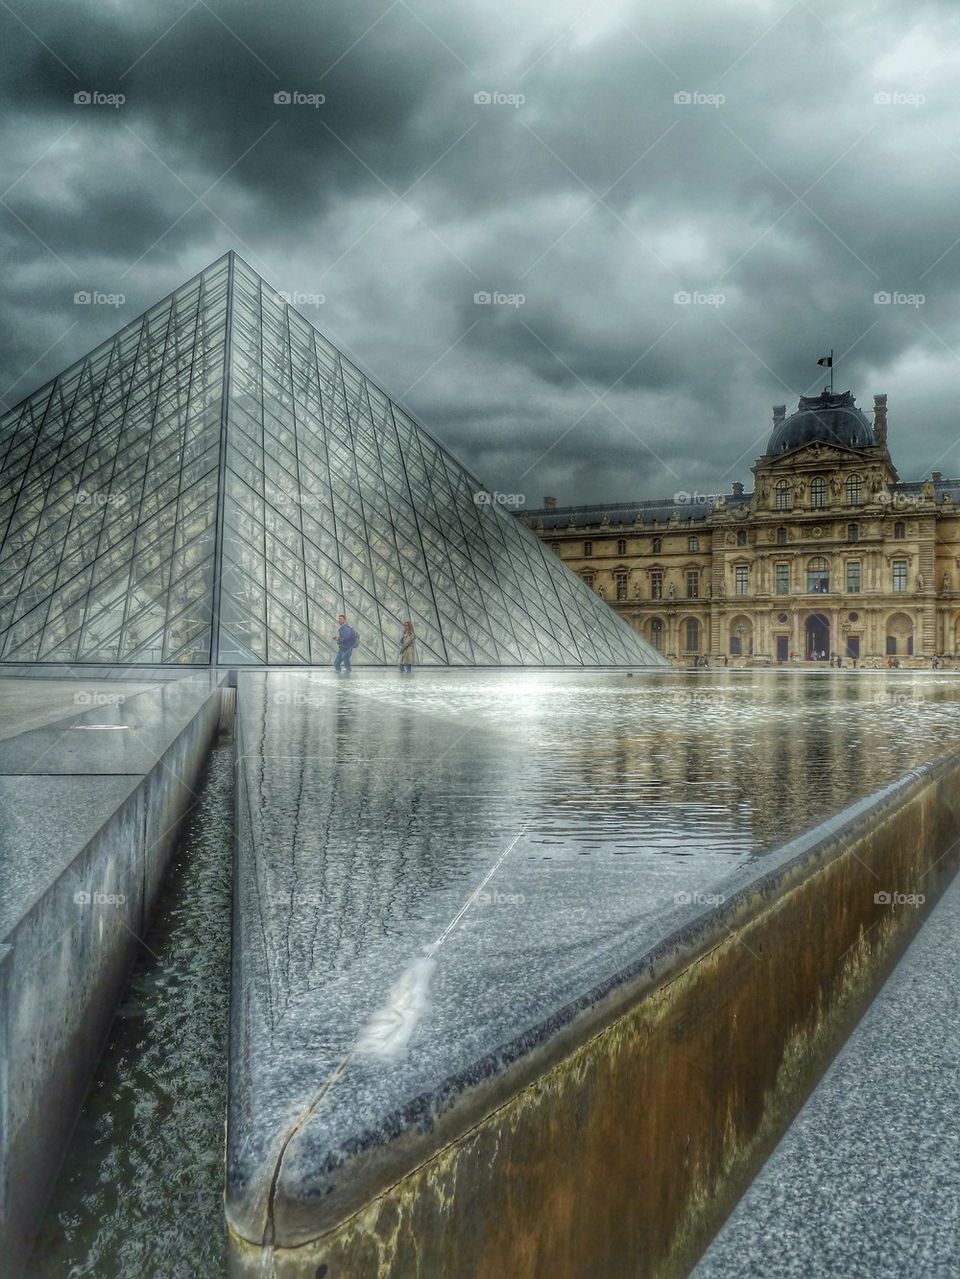 The Louvre fountain shot